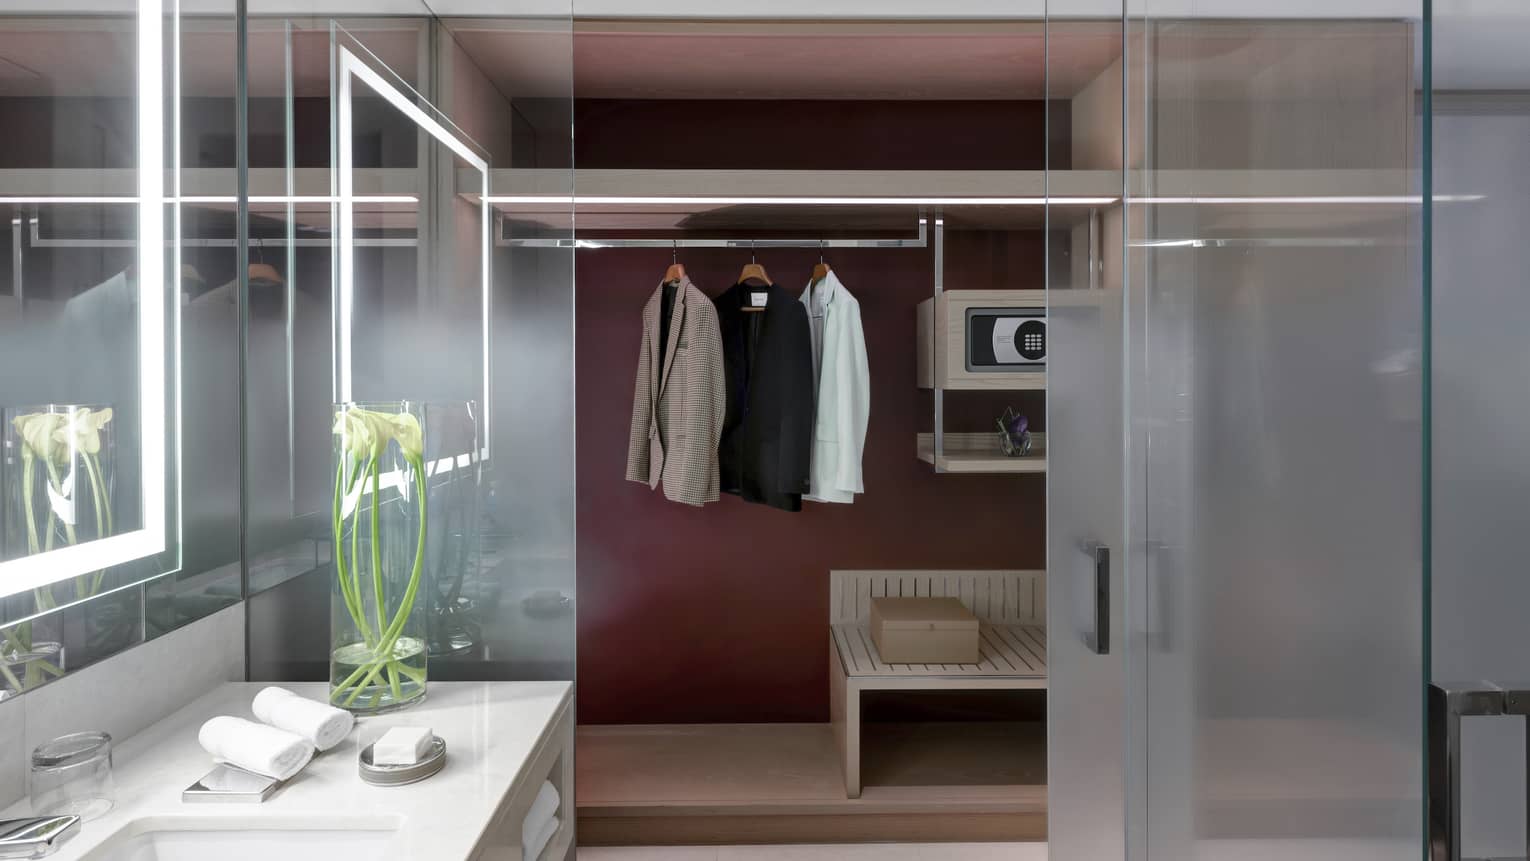 Bathroom opening to a closet